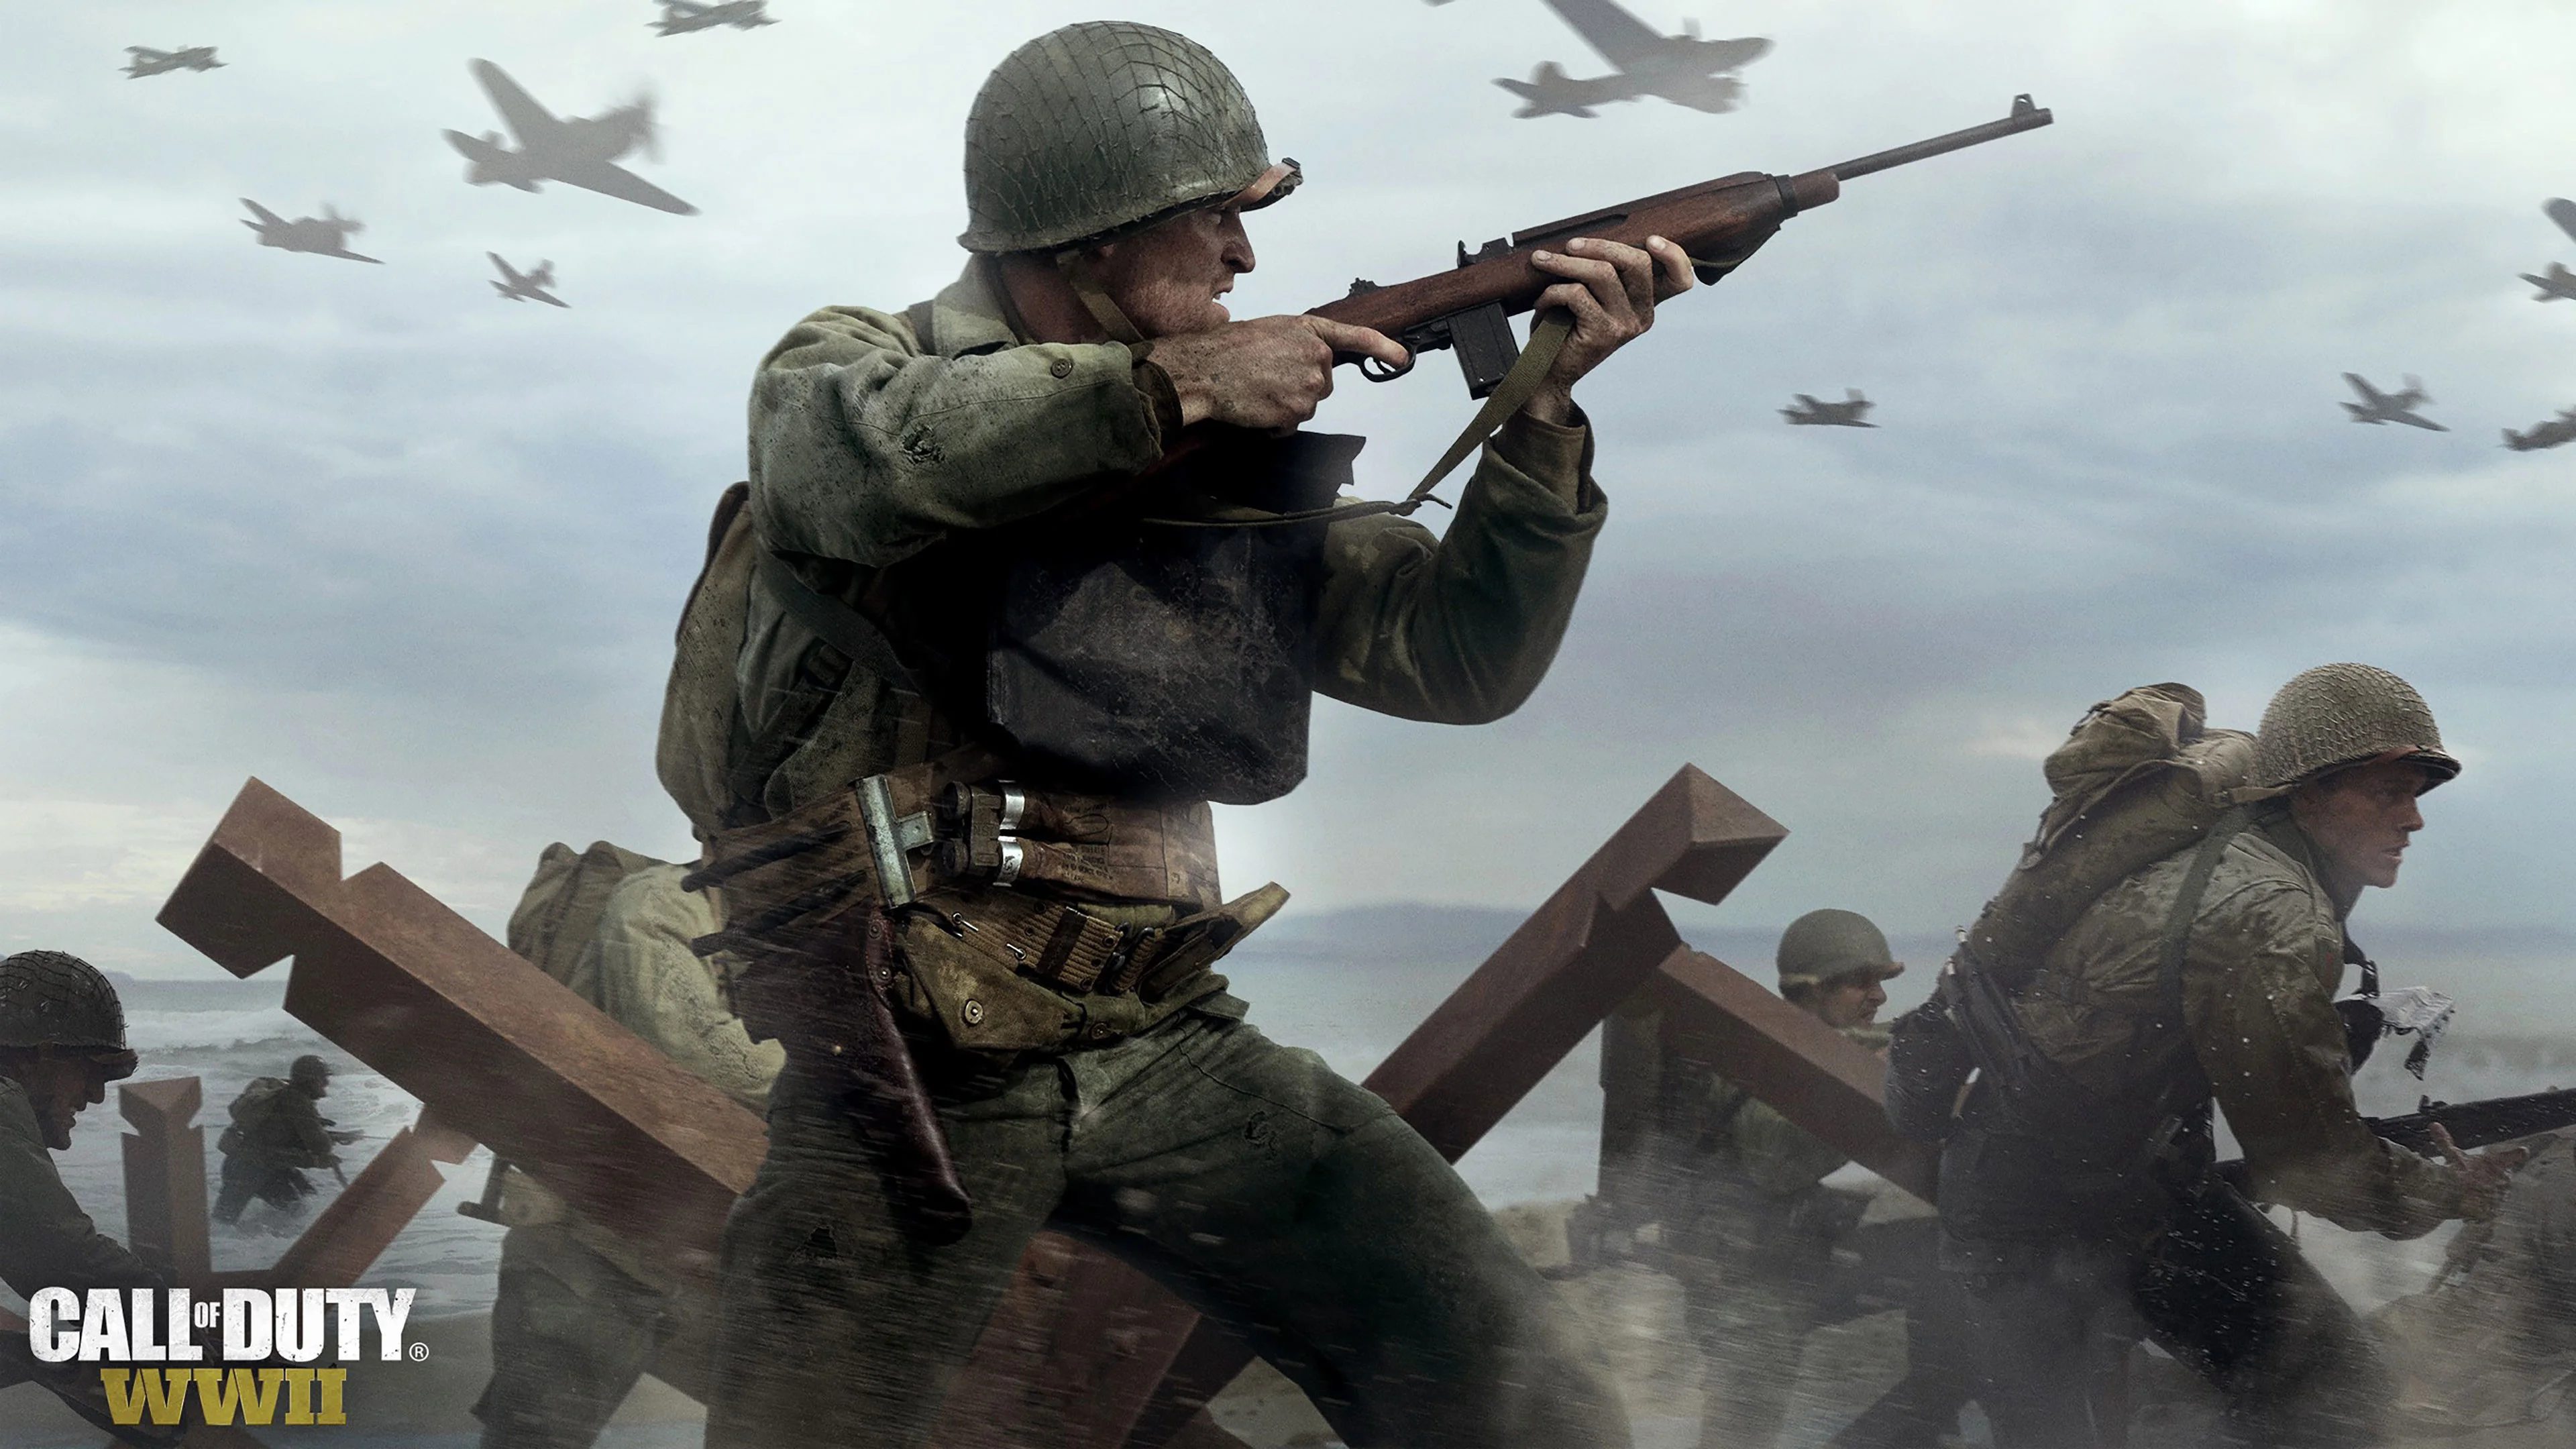 Awesome Call of Duty WWII Soldiers in War wallpaper